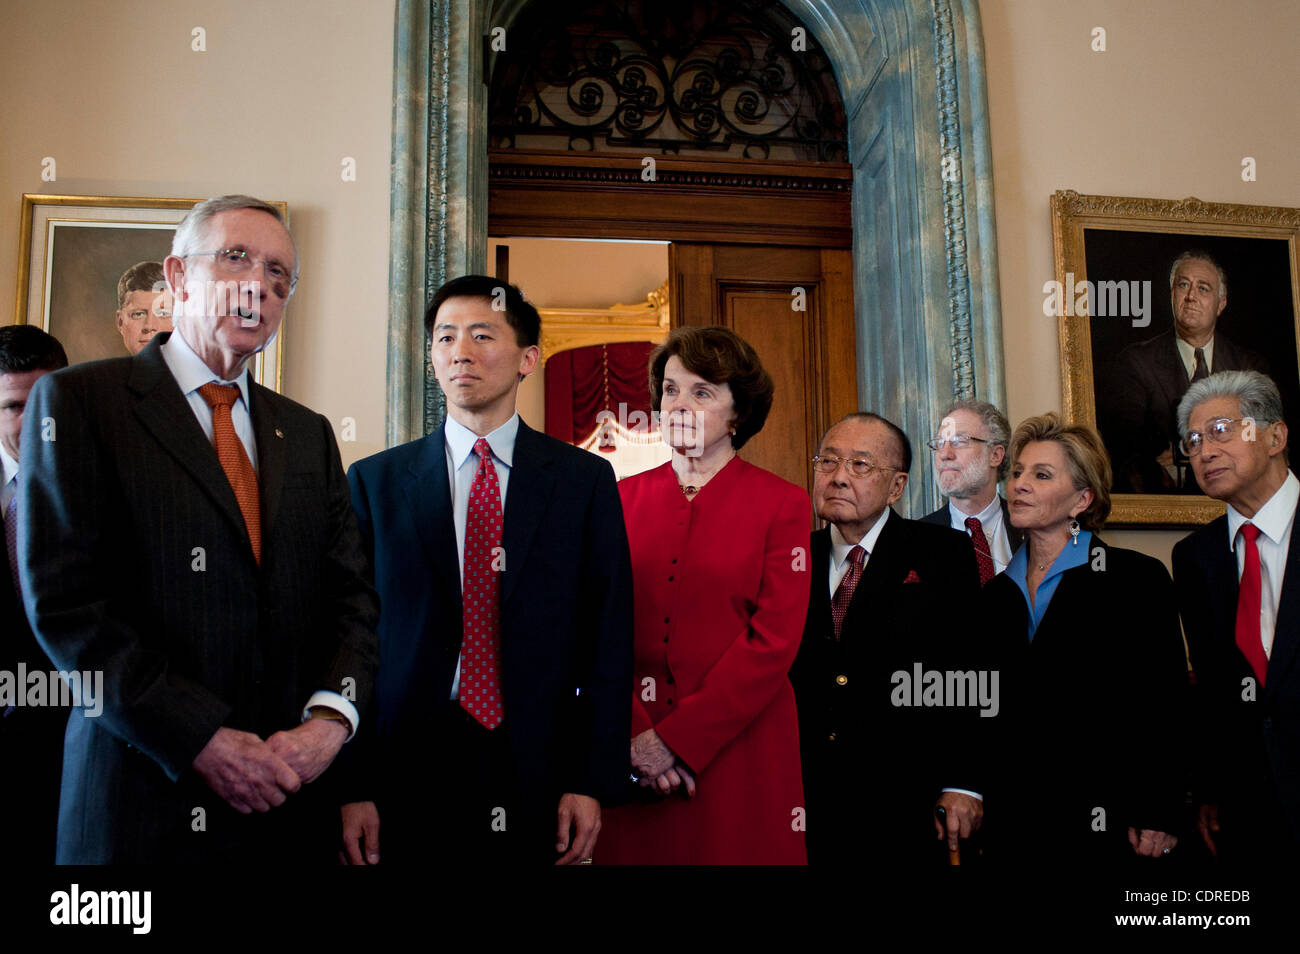 May 18, 2011 - Washington, District of Columbia, U.S. - Majority Leader HARRY REID (D-NV) along with Senators DIANNE FEINSTEIN (D-CA), DANIEL INOUYE(D-HI), BARBARA BOXER (D-CA) and DANIEL AKAKA (D-HI) appear with appeals court nominee GOODWIN LIU at a press conference on Wednesday. The Senate is sch Stock Photo